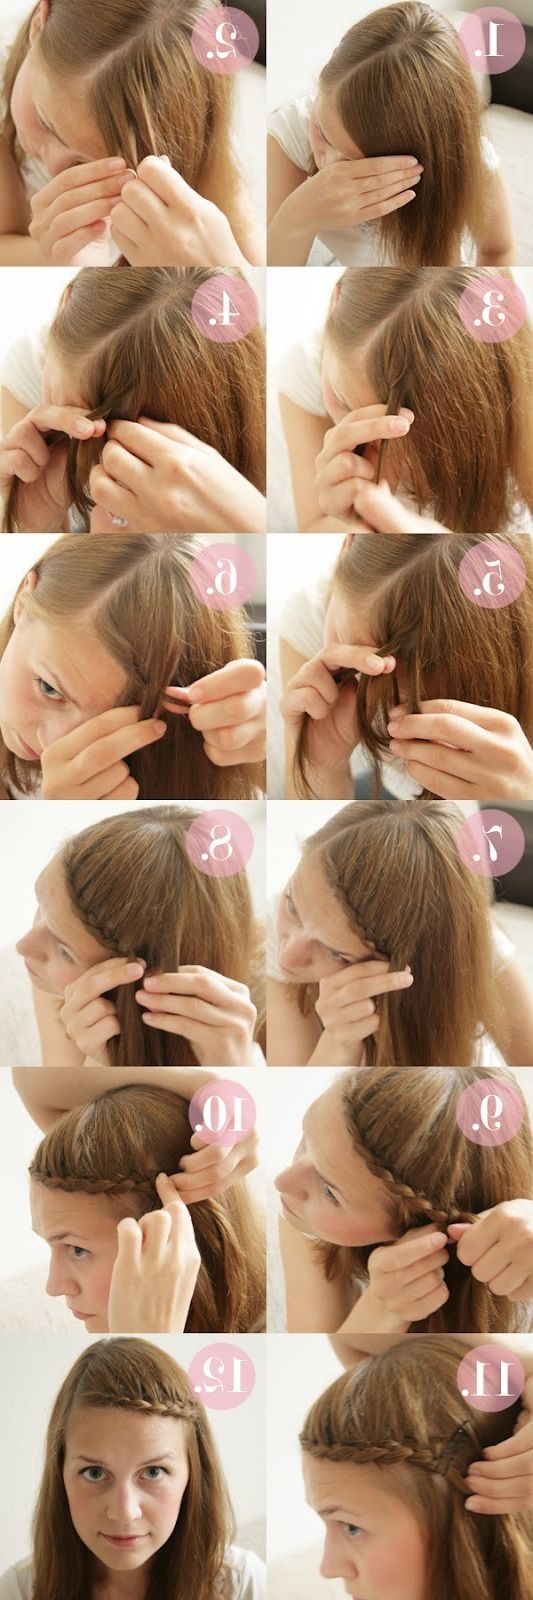 15 Braided Bangs Tutorials: Cute, Easy Hairstyles – Pretty With Regard To Newest Braid Hairstyles With Braiding Bangs (View 12 of 20)